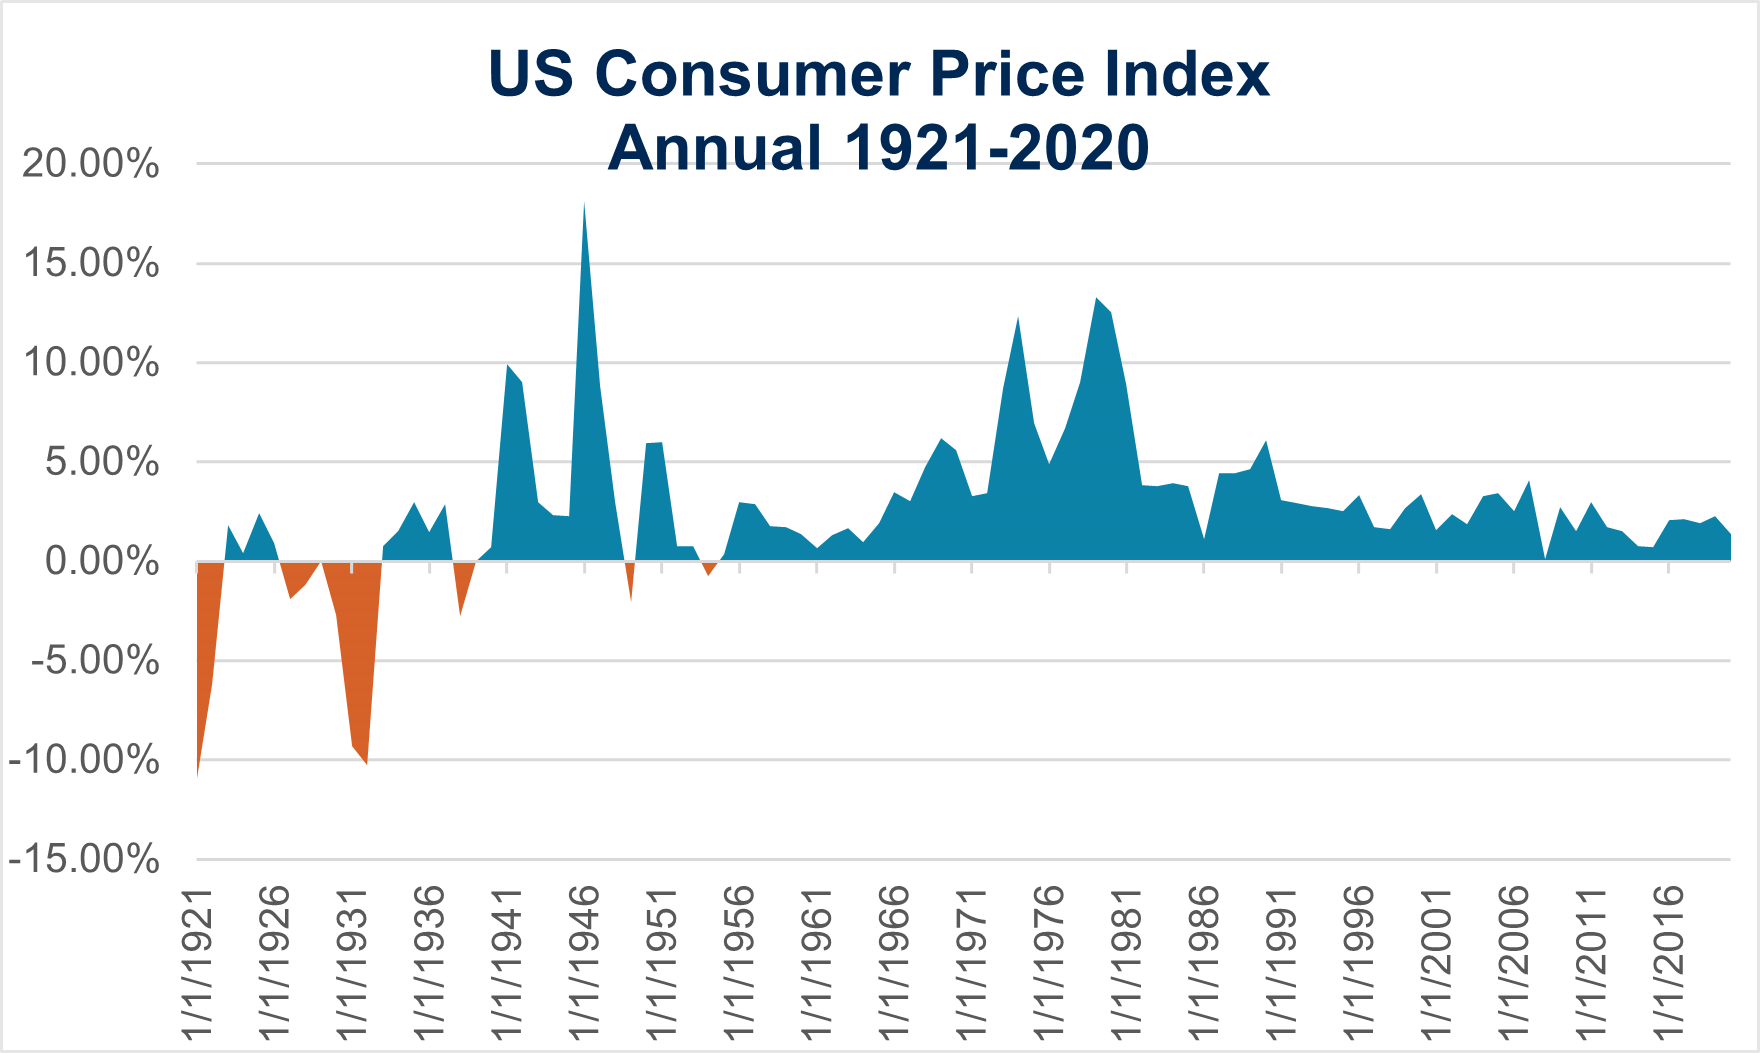 Historical US CPI on an annual basis from 1921 to 2020